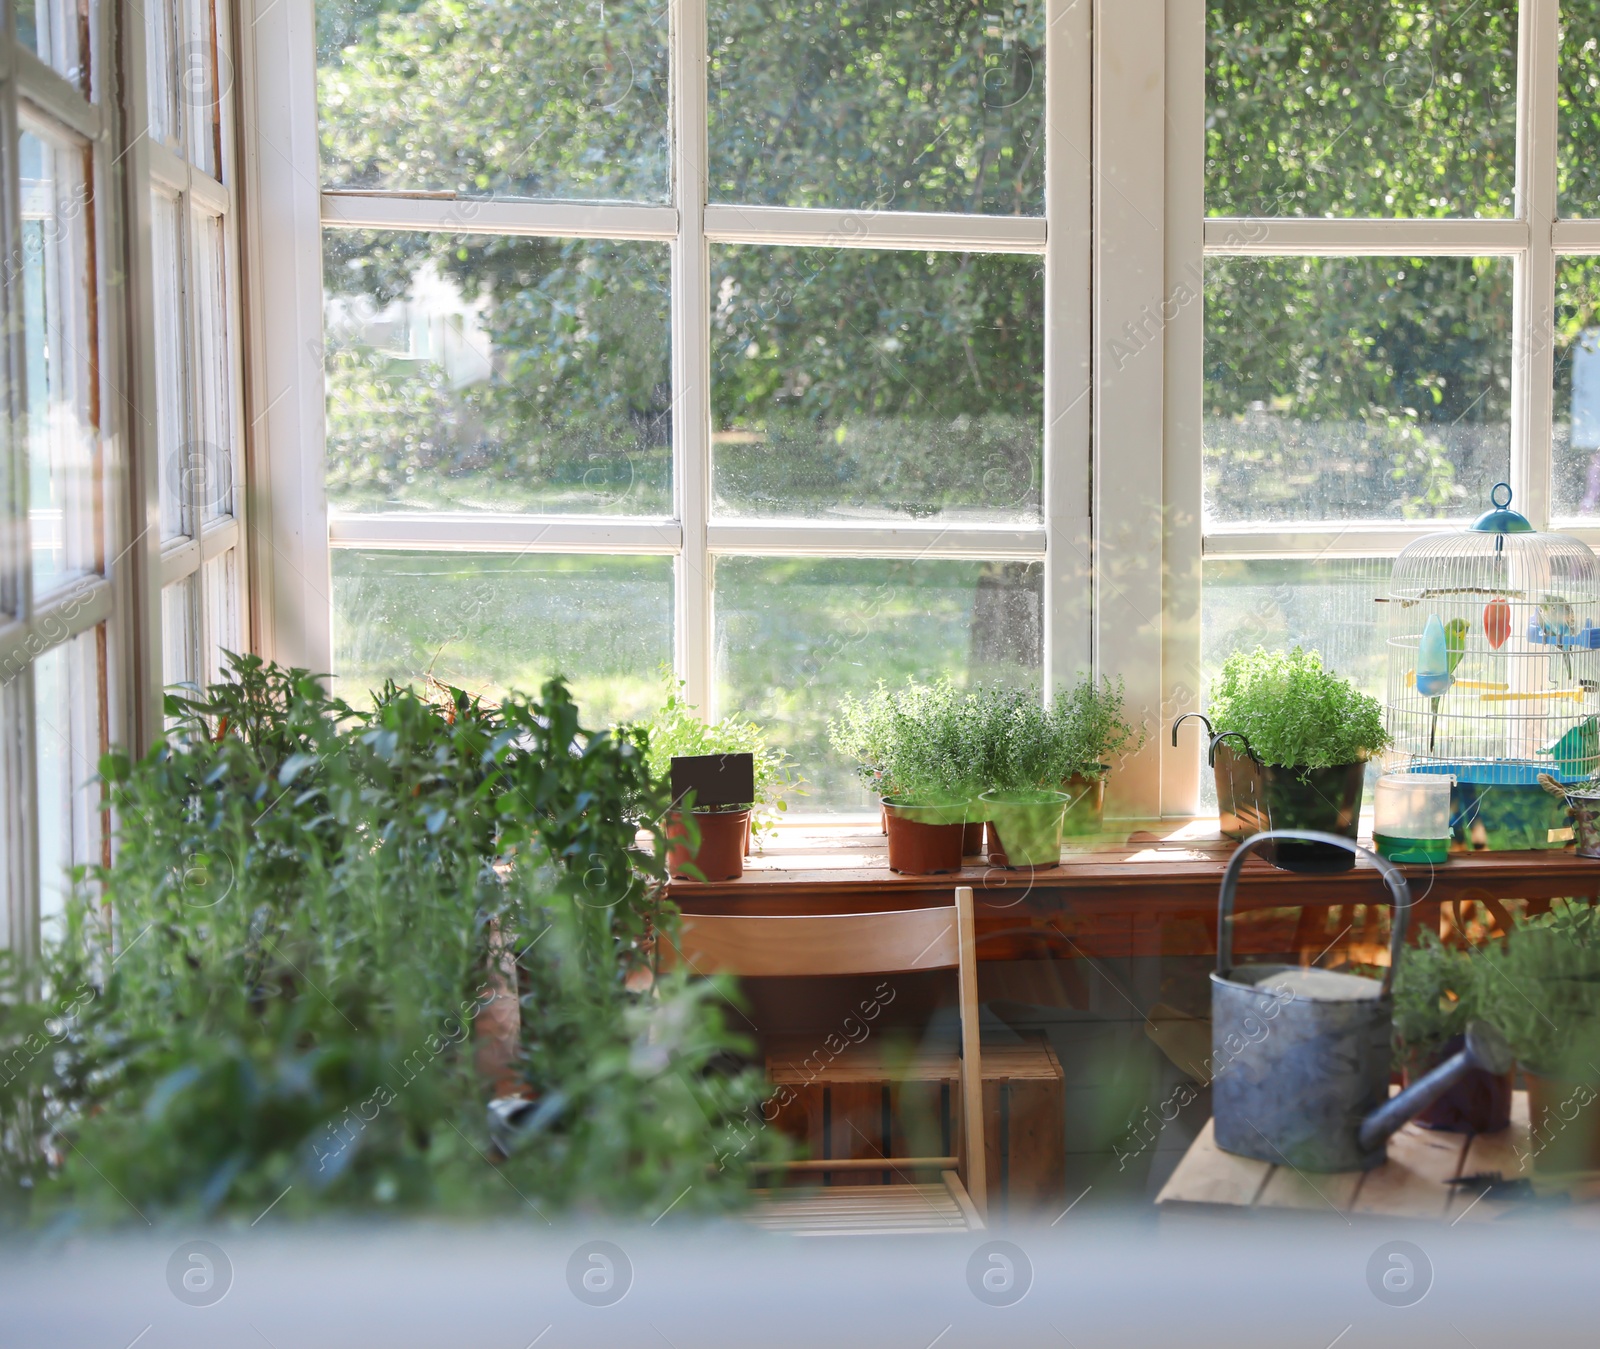 Photo of Shop with potted home plants and young woman, view through window